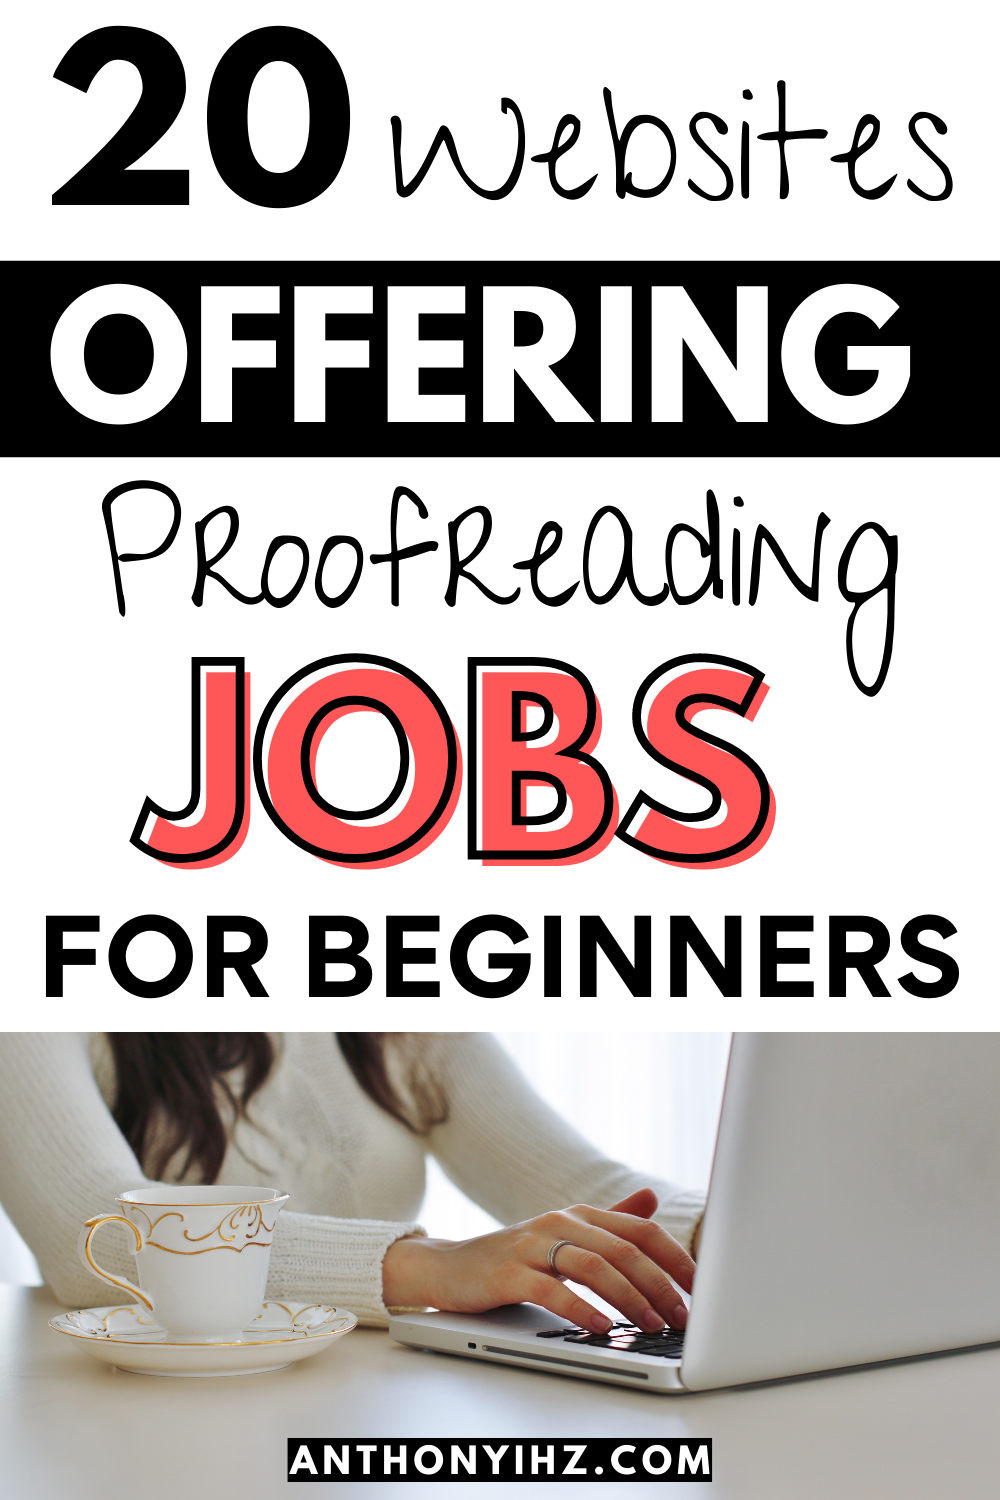 Online proofreading jobs for beginners